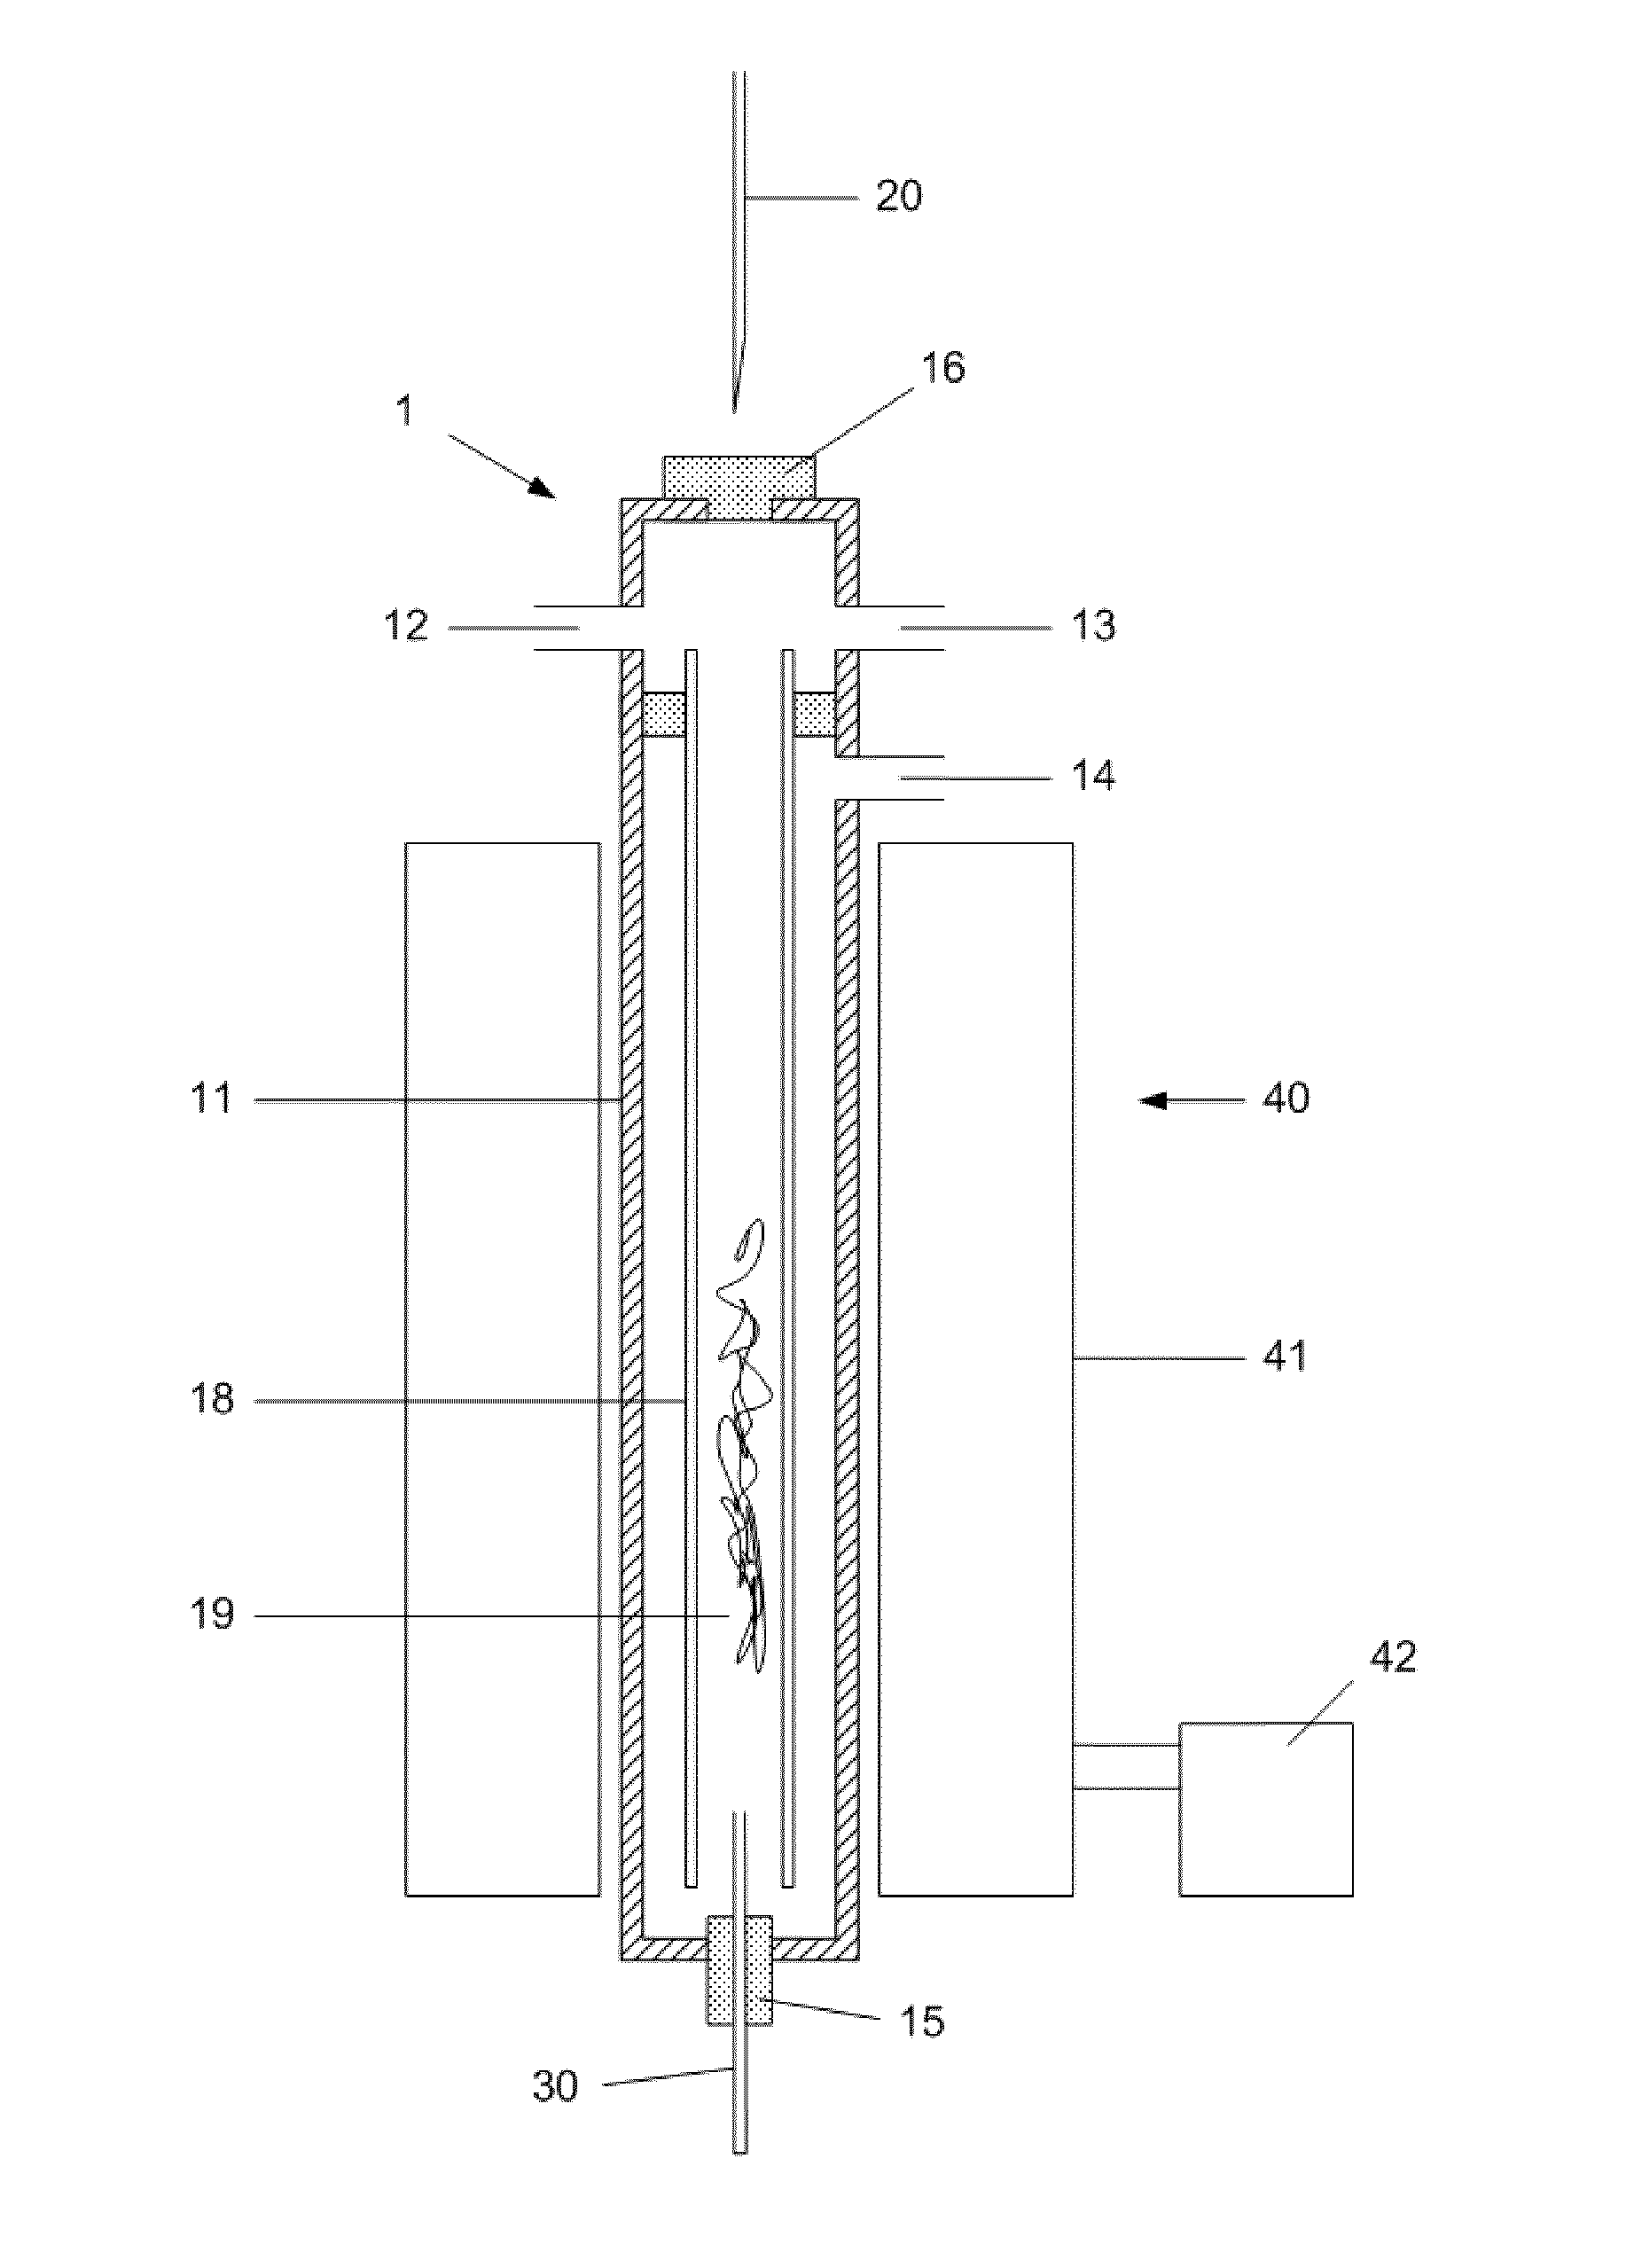 Sample introduction device and method